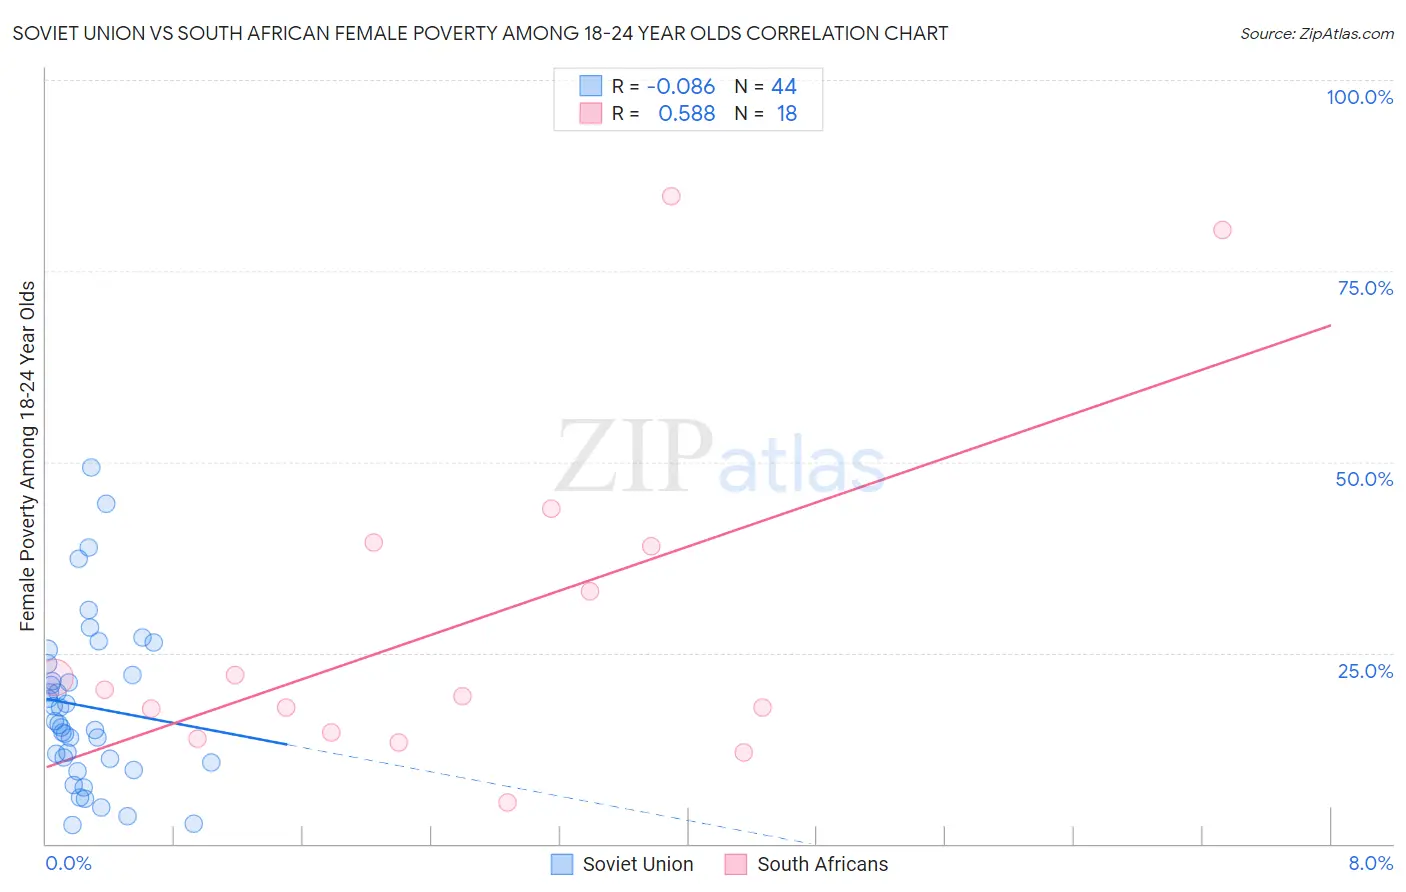 Soviet Union vs South African Female Poverty Among 18-24 Year Olds